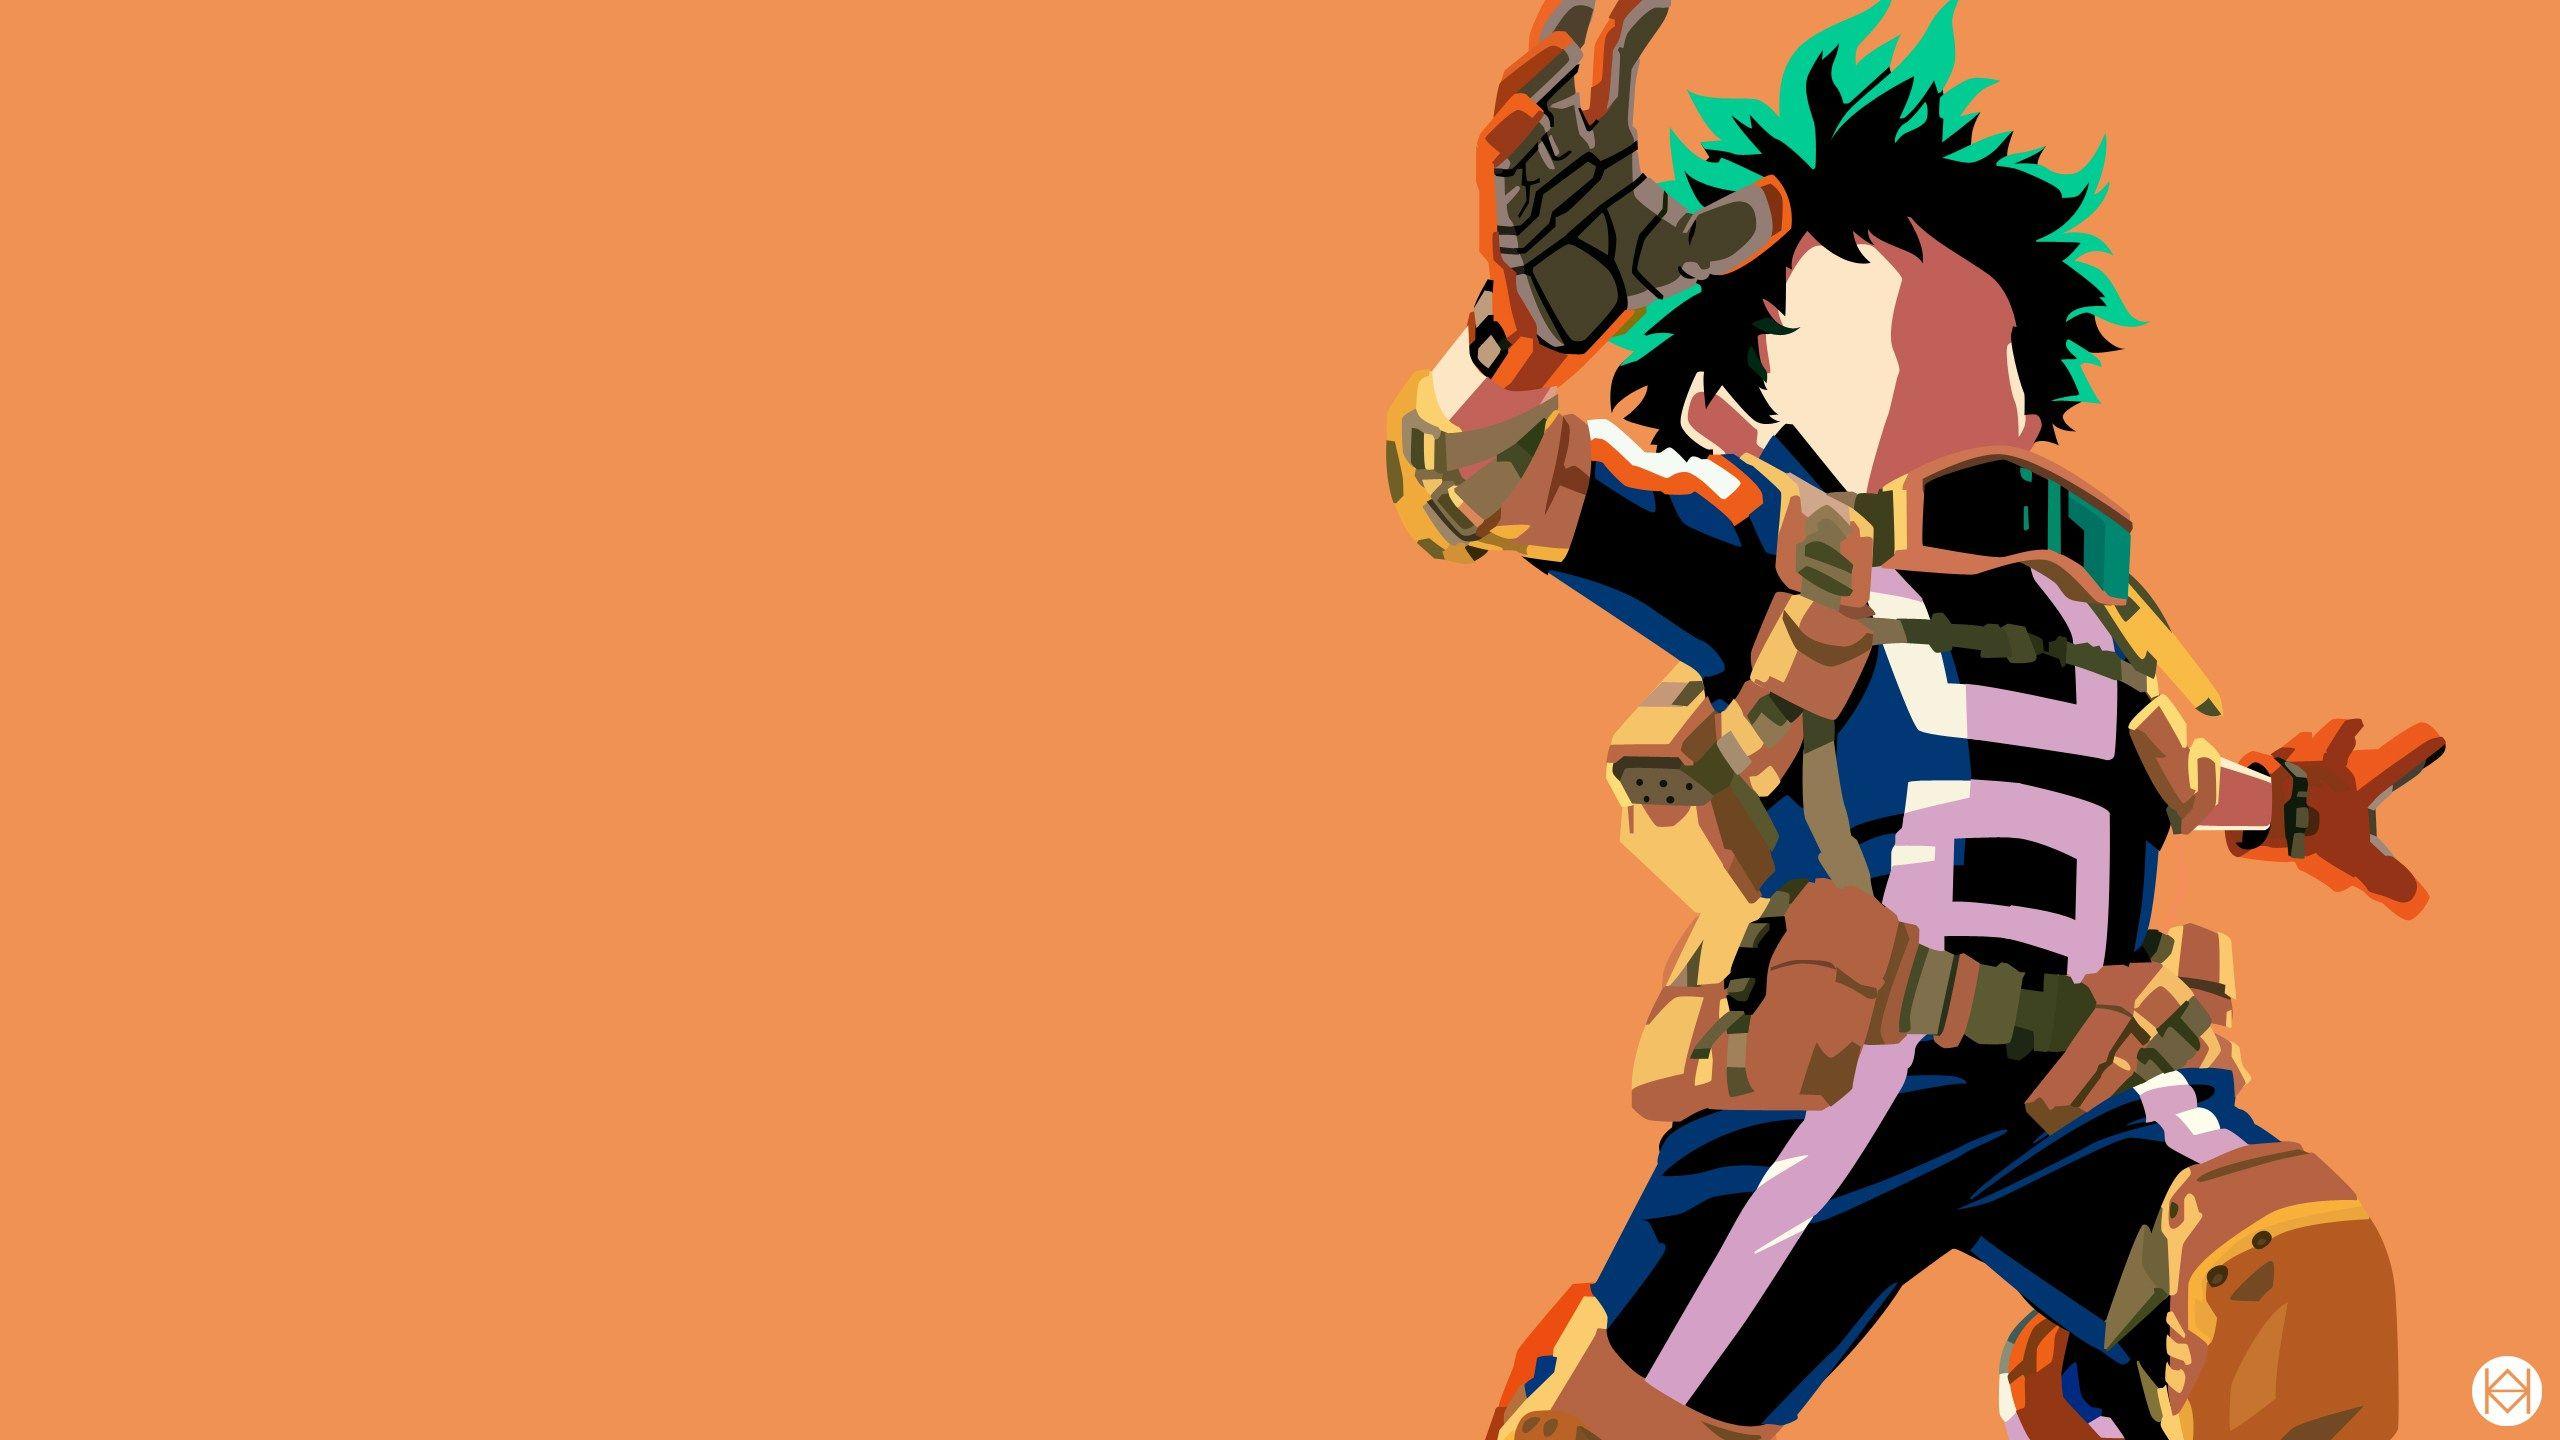 Check out more awesome minimalist wallpaper at My Hero